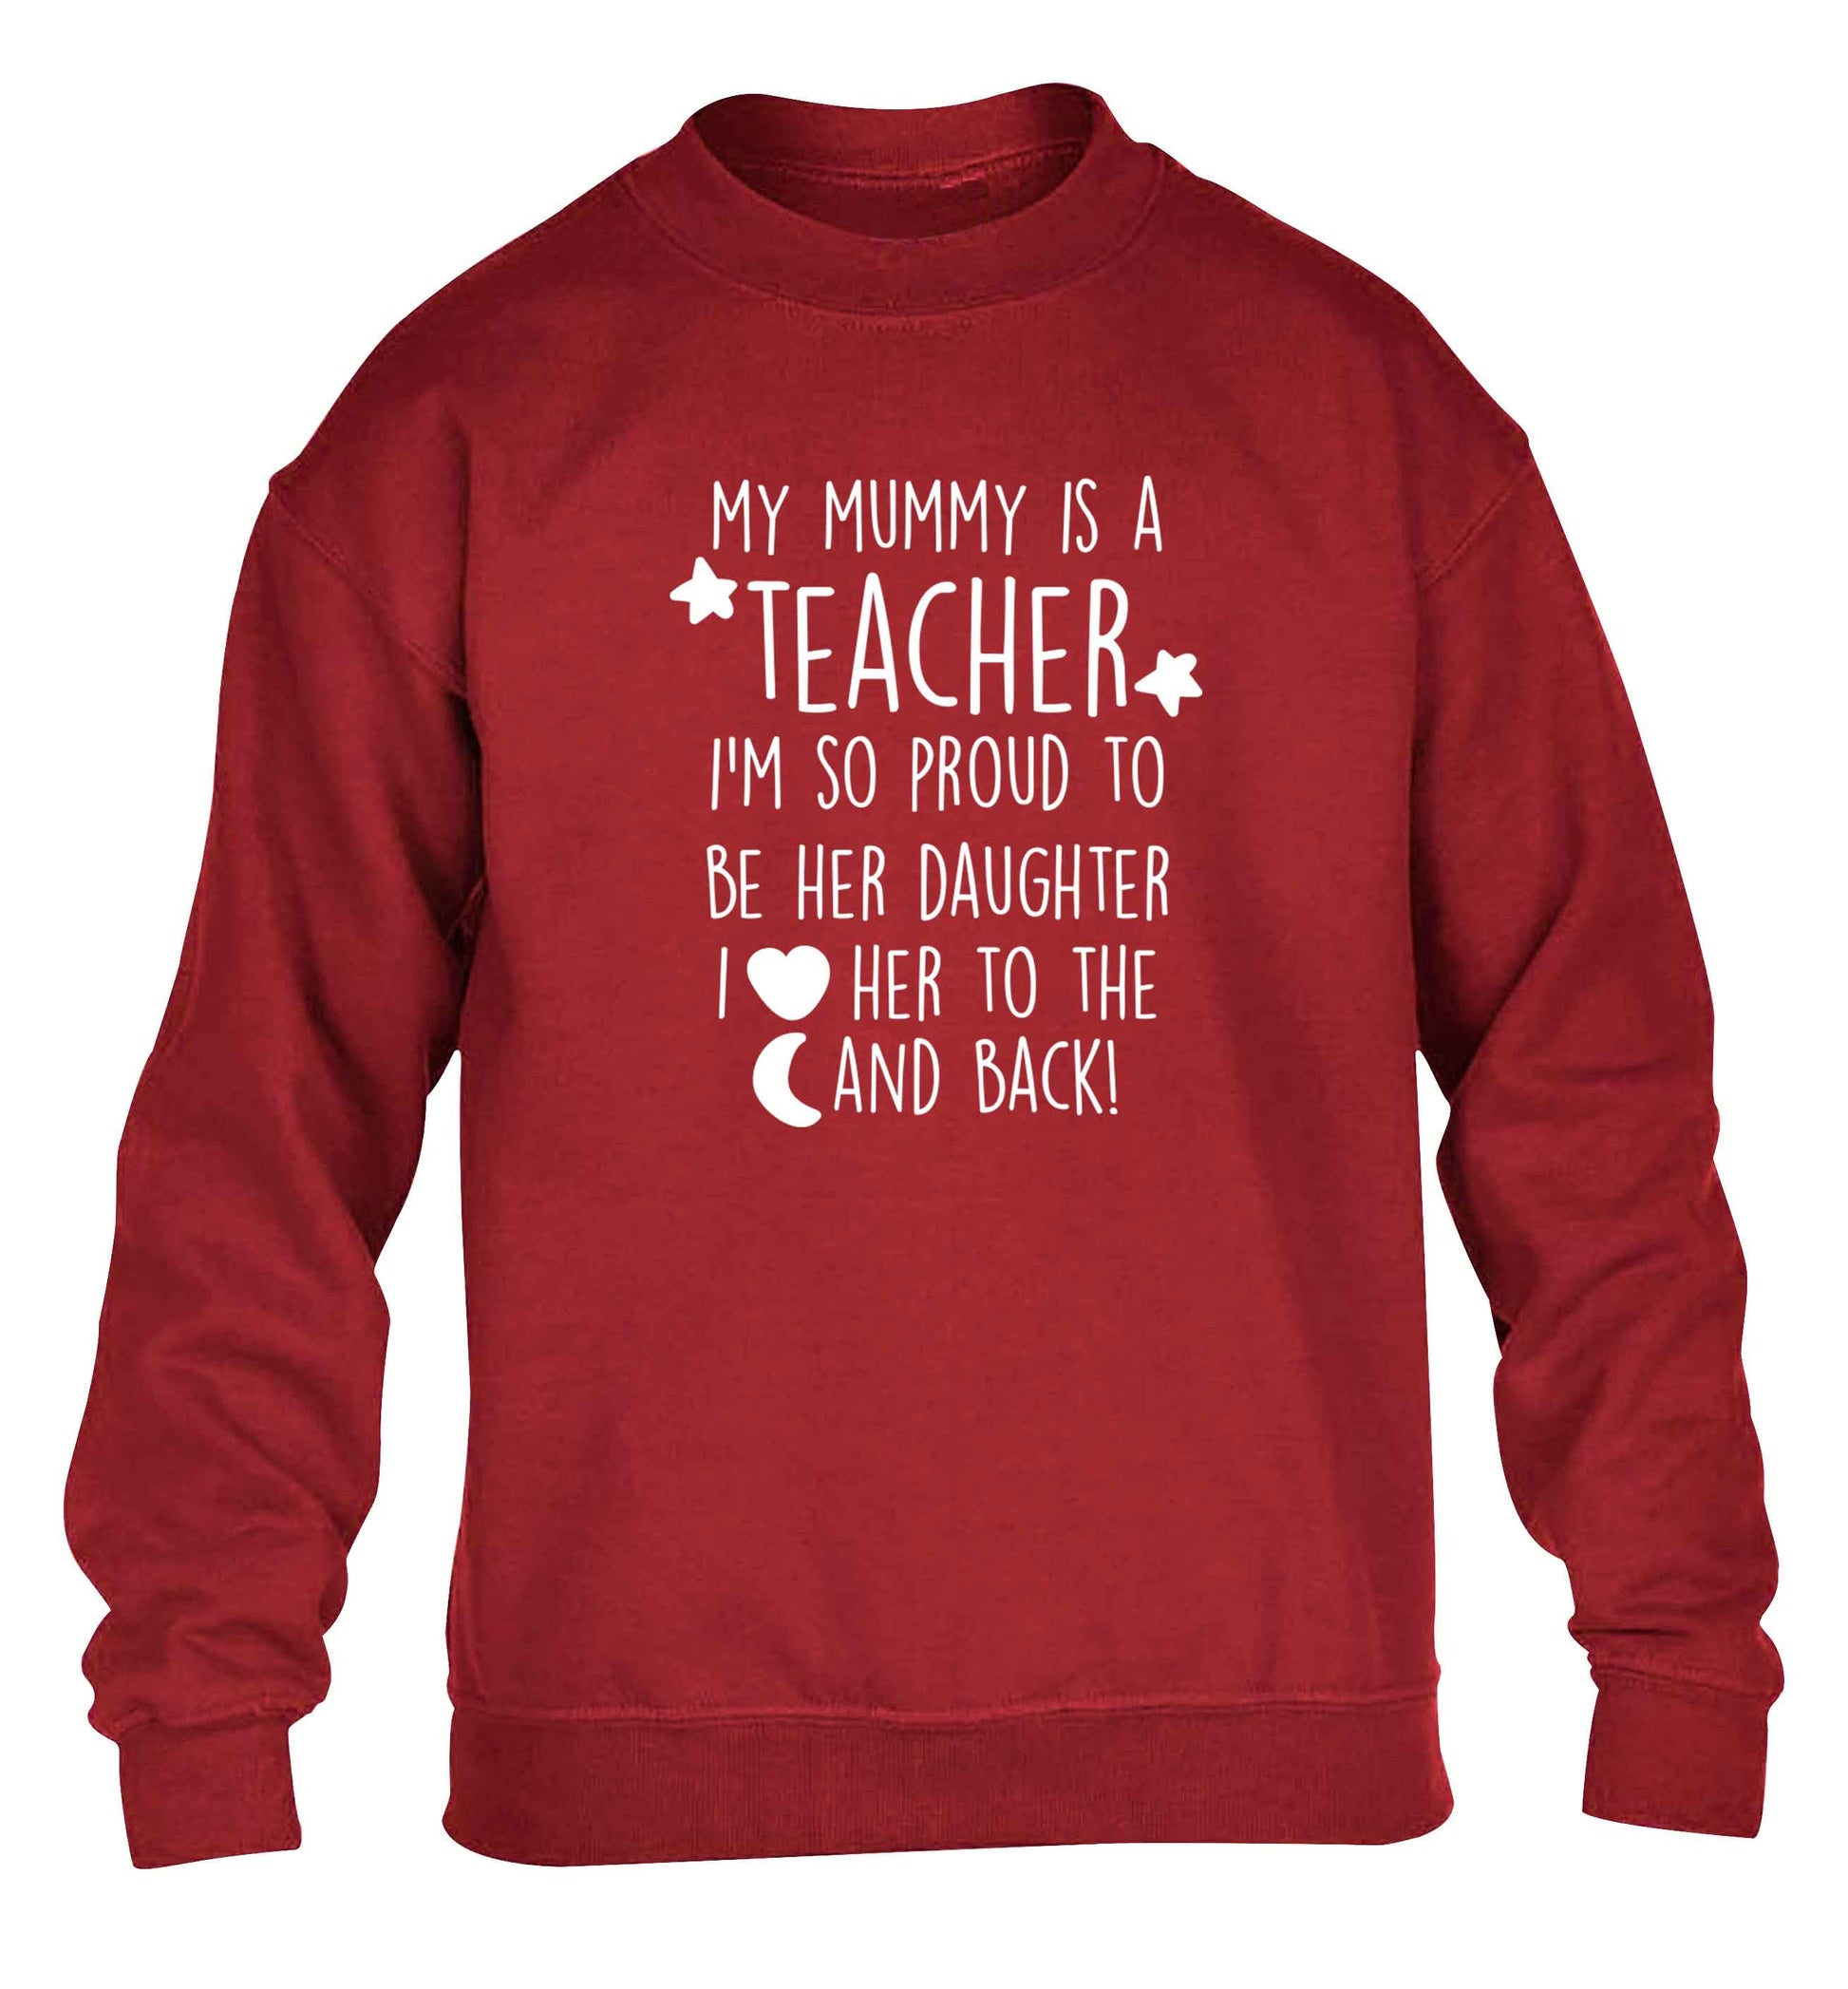 My mummy is a teacher I'm so proud to be her daughter I love her to the moon and back children's grey sweater 12-13 Years